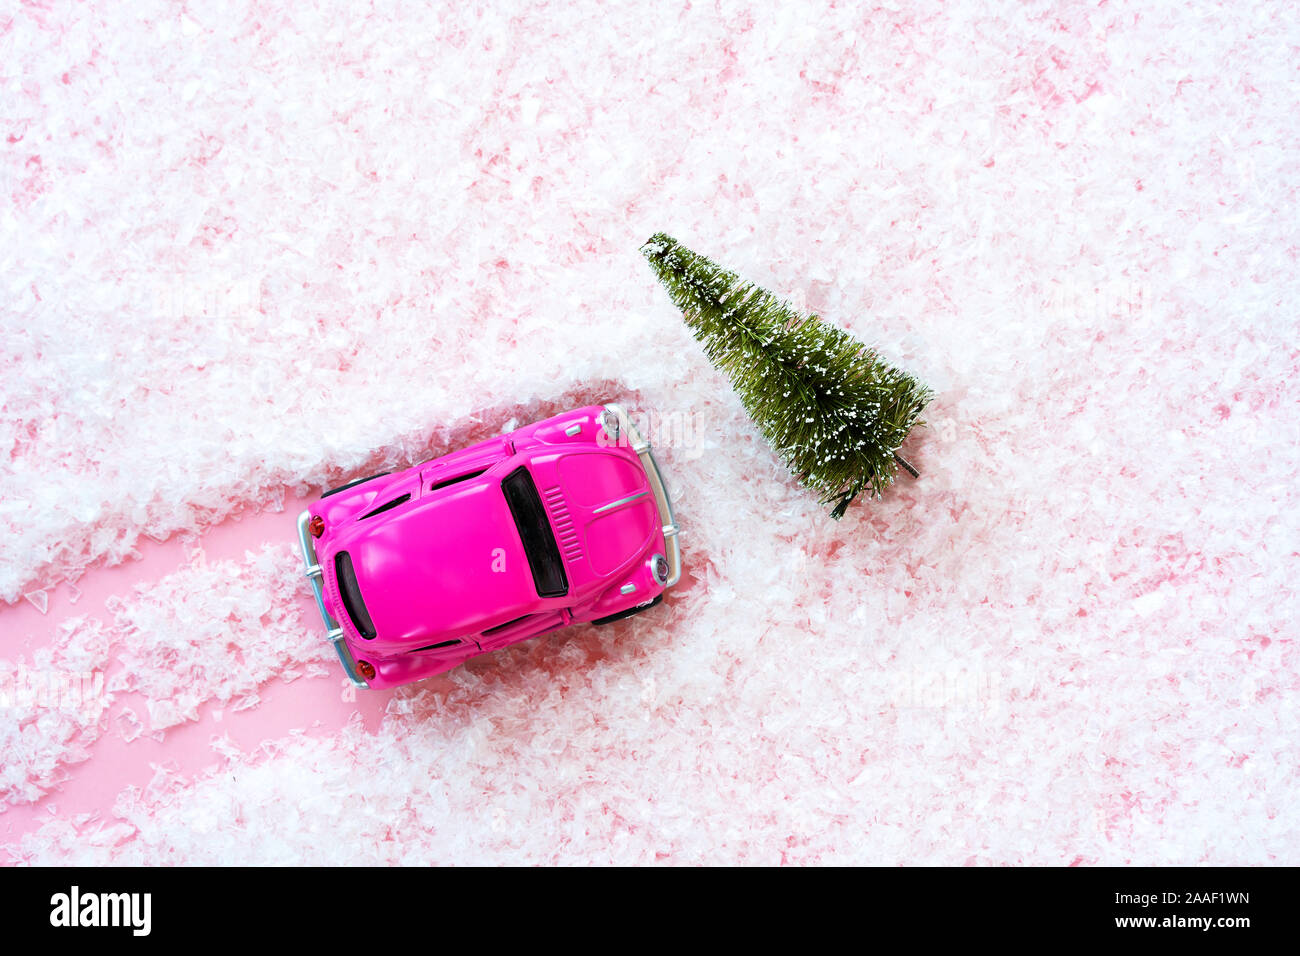 Small toy kids car and green Christmas tree on pink covered artificial snow Stock Photo